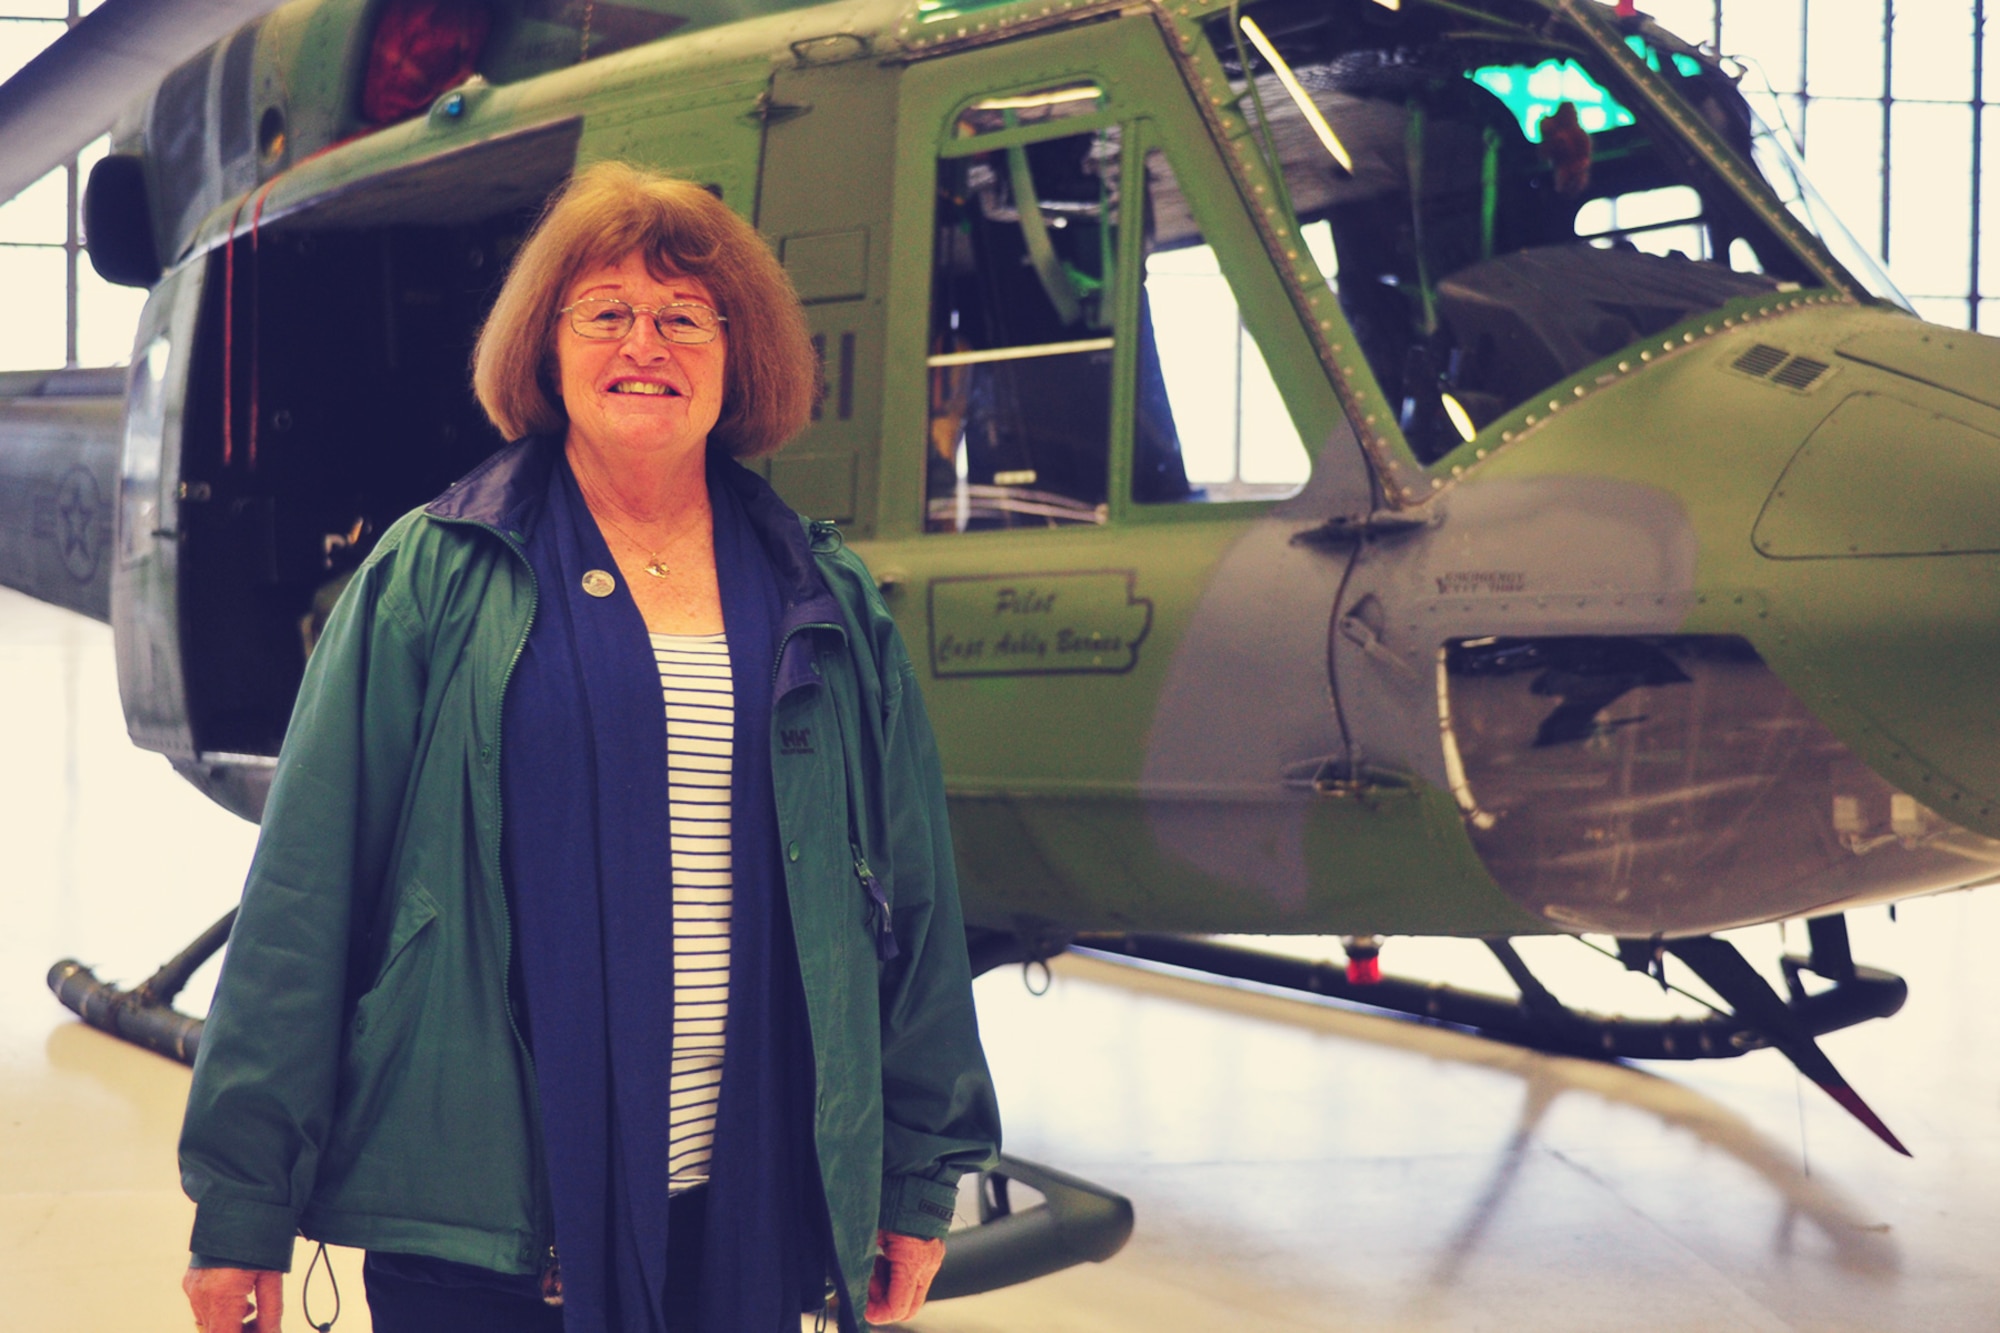 George “Julie” Kubat, an Air Force spouse and a member of the Fairchild Air Force Base family for roughly 40 years, stands in front of a helicopter at the Veterans Day ceremony Nov. 7, 2013 at Fairchild Air Force Base, Wash. Kubat shares the story of her early years which began in an Indonesian ‘prisoner of war’ camps with her mother. (U.S. Air Force/Senior Airman Taylor Curry) 